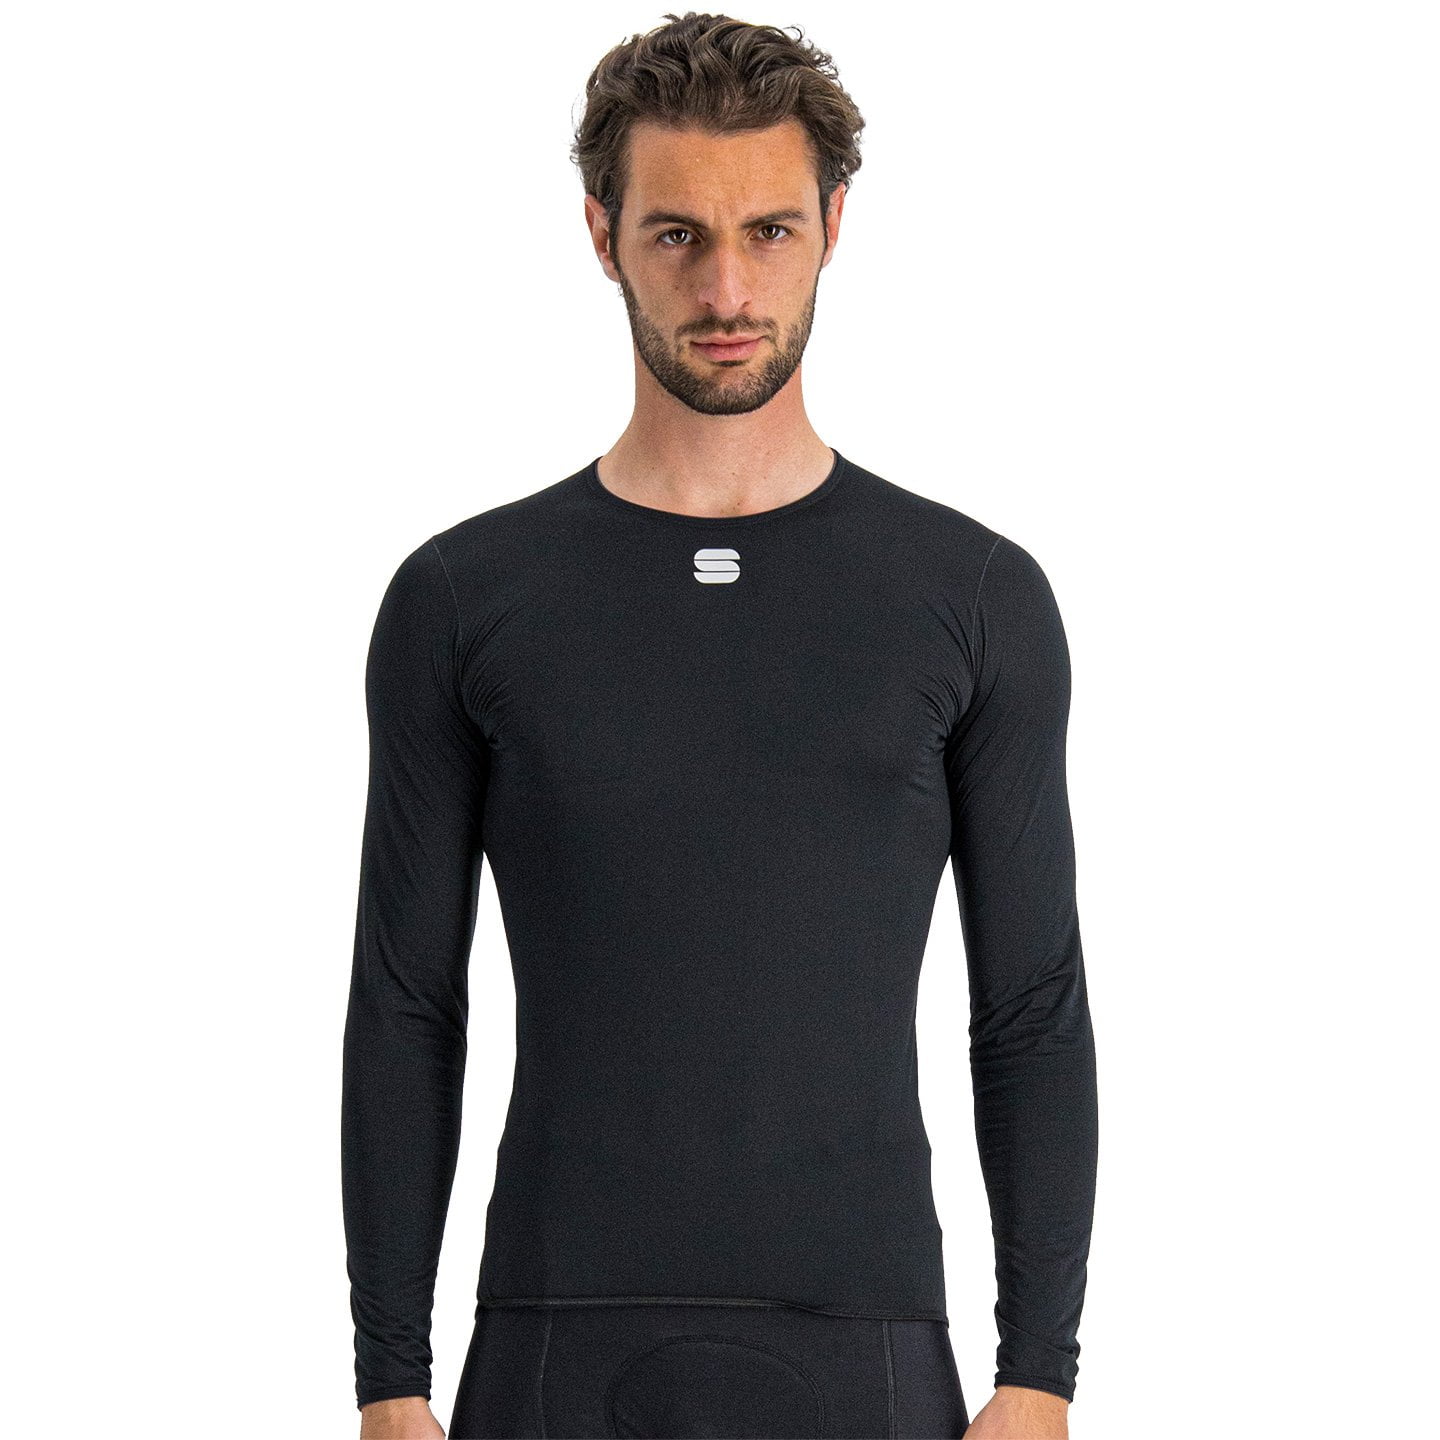 Sportful Midweight Long Sleeve Cycling Base Layer Base Layer, for men, size M, Singlet, Cycling clothing